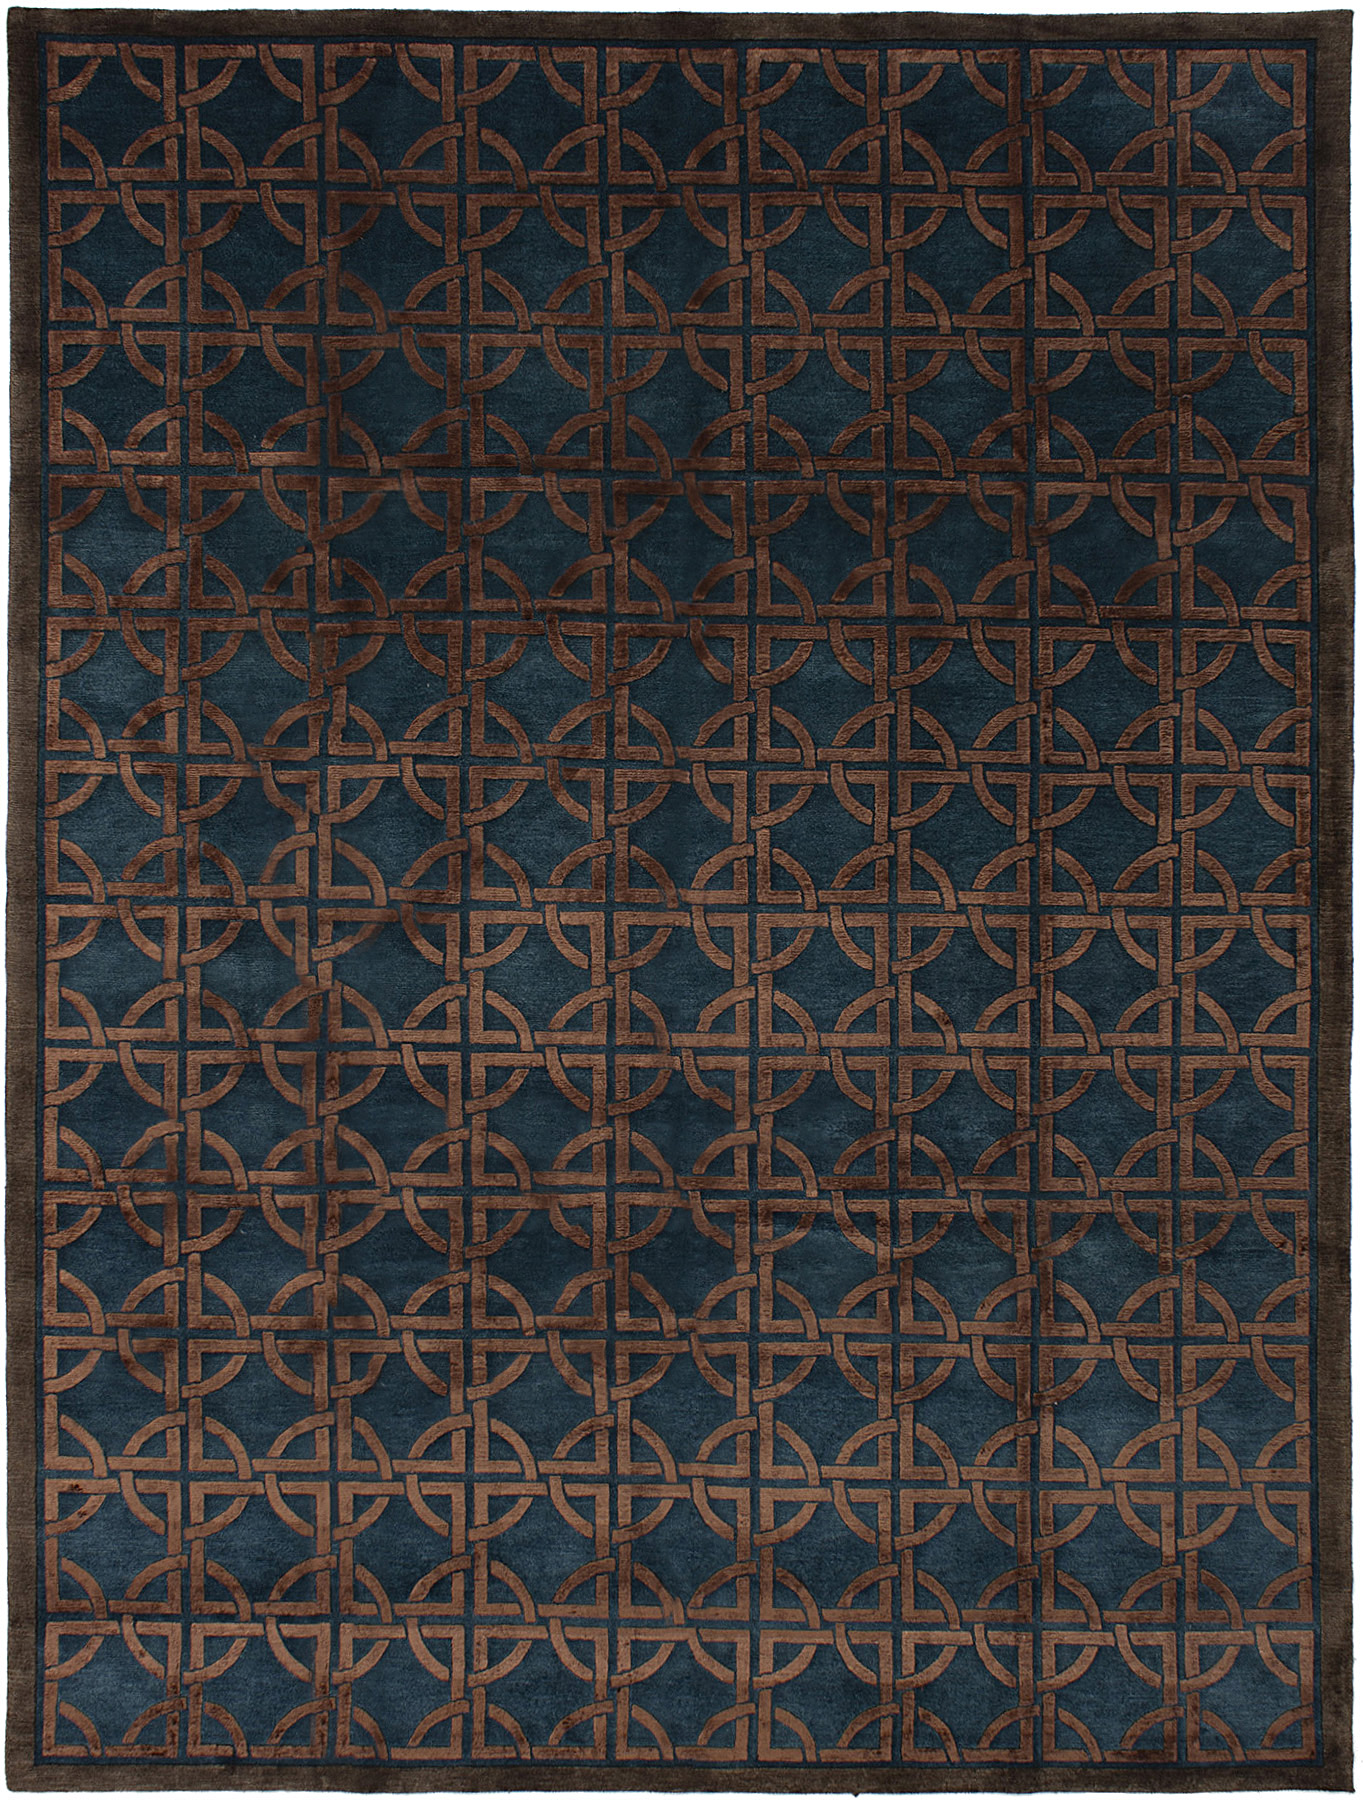 Hand-knotted Silk Touch Brown, Turquoise Wool/Silk Rug 8'6" x 11'6" Size: 8'6" x 11'6"  